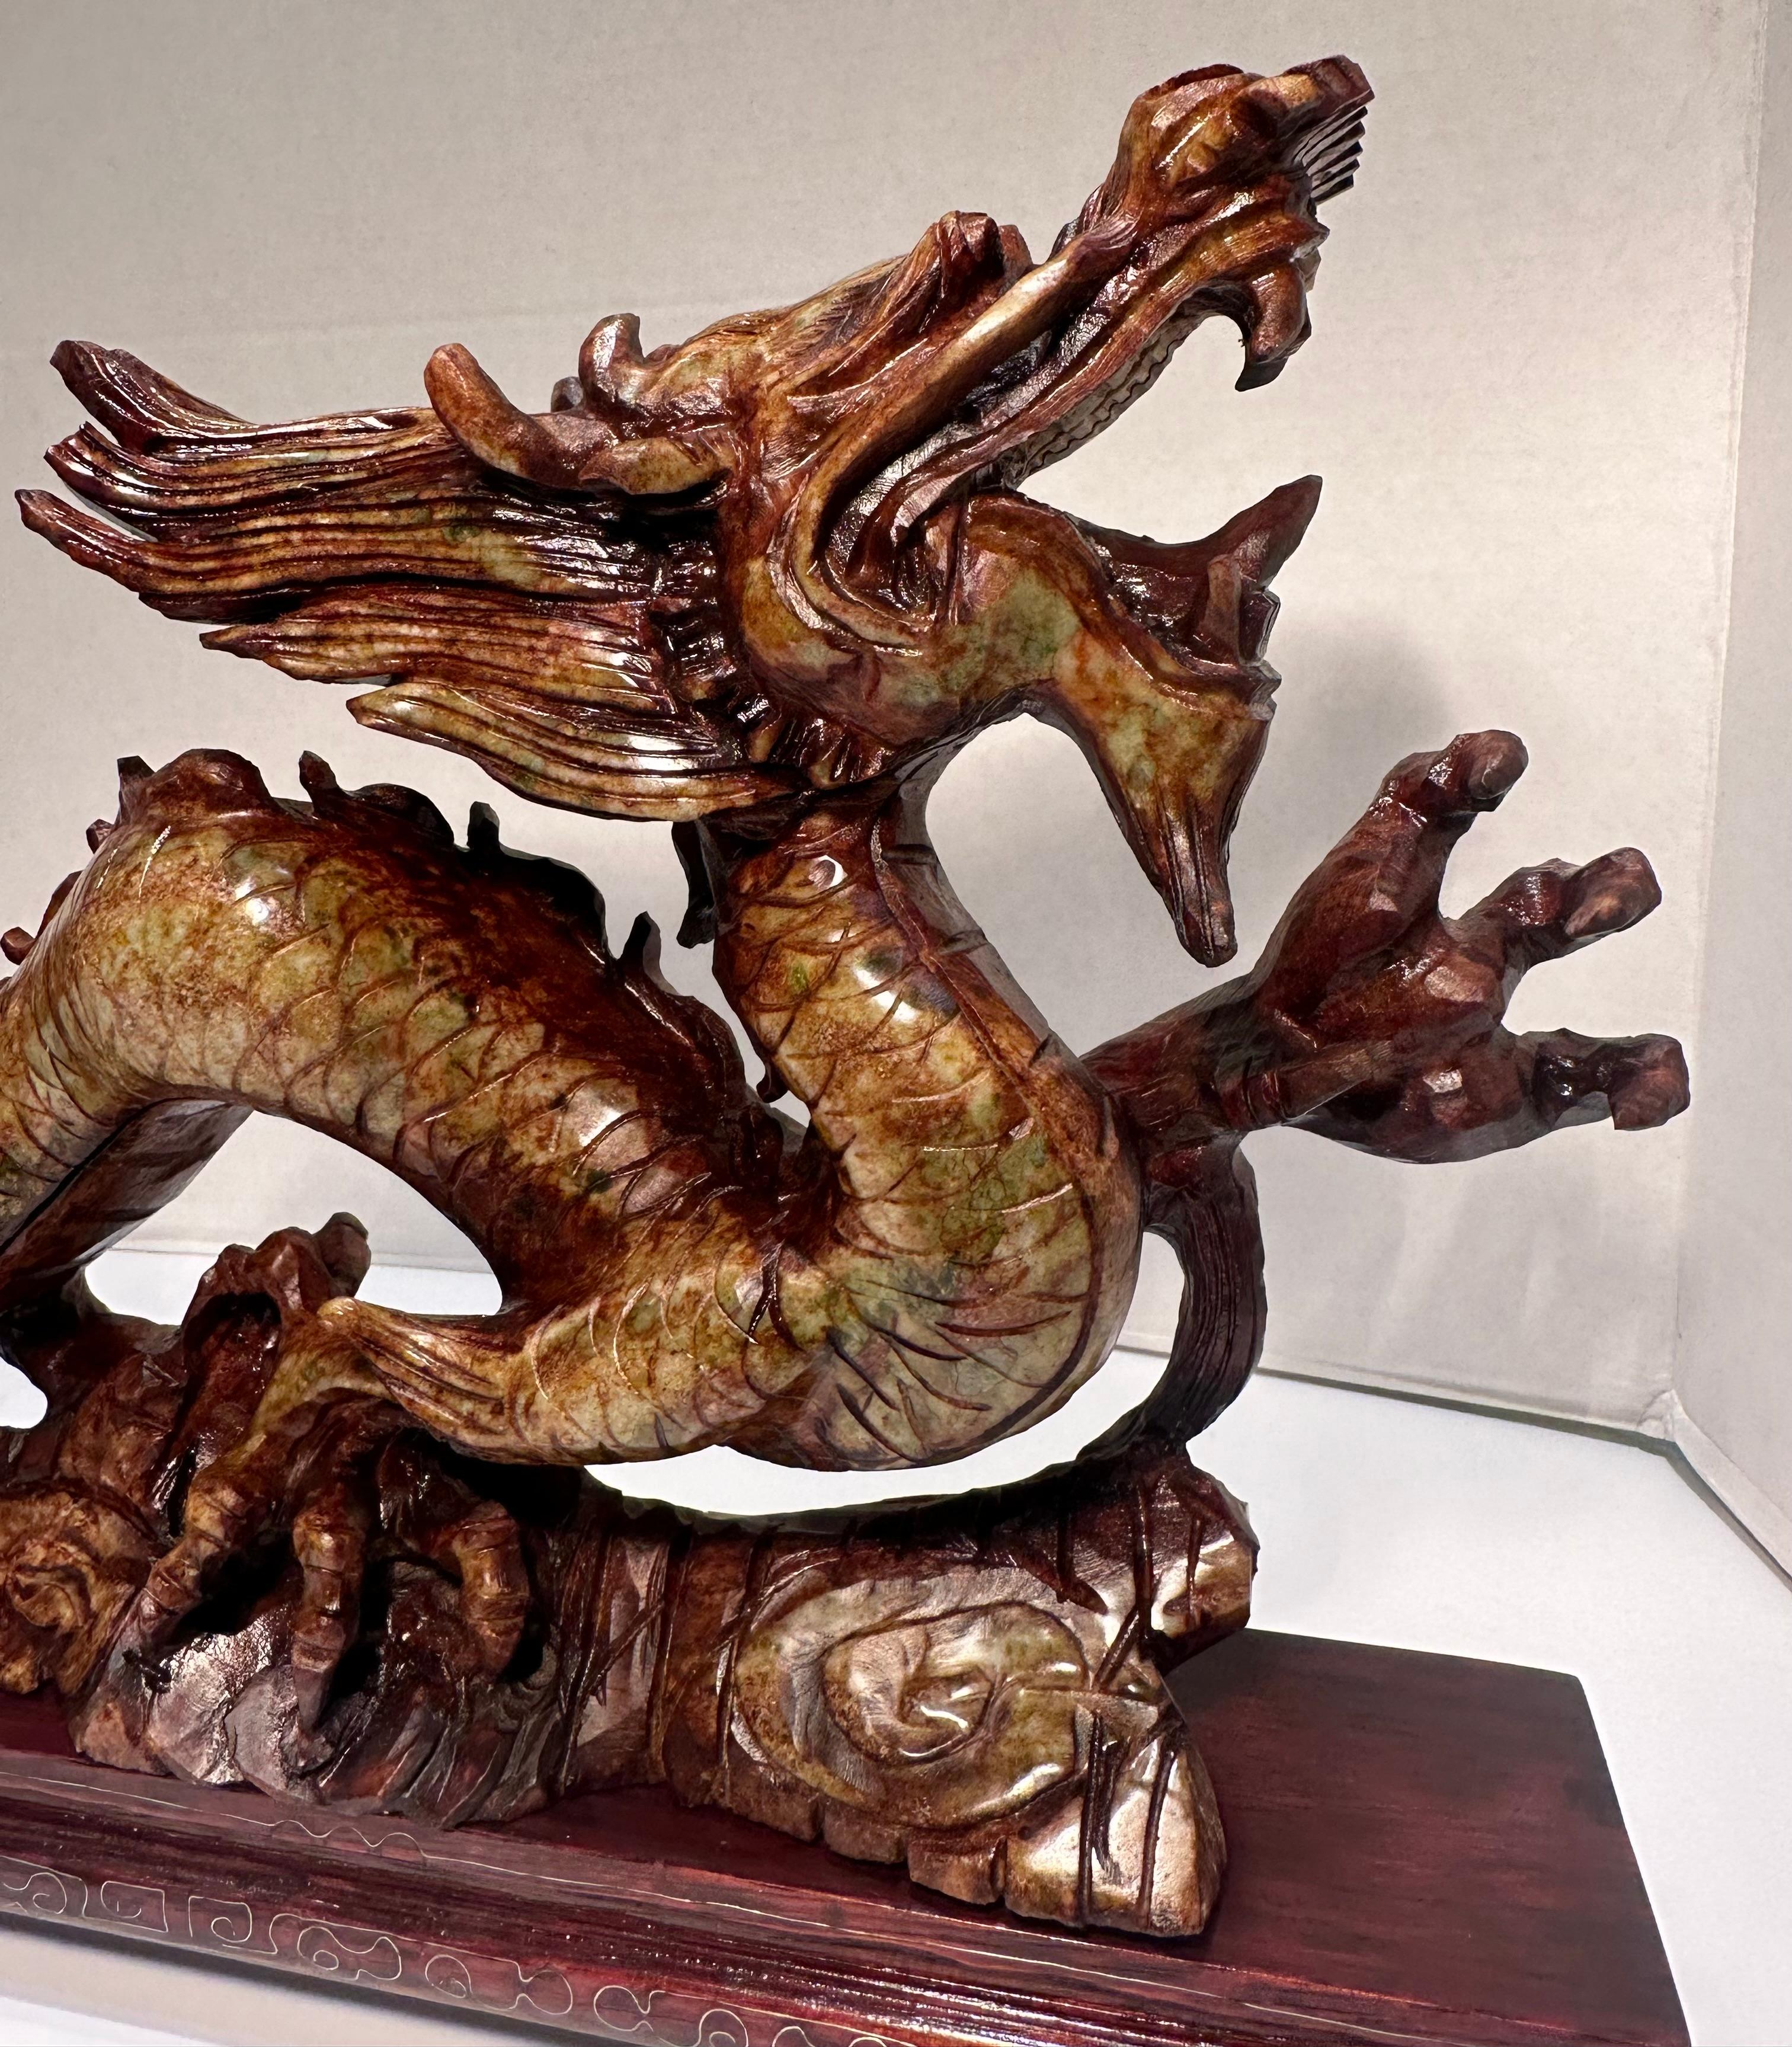 Intricately hand carved from a single block of richly variegated stone, this incredibly detailed and elaborate, Chinese sculpture is a true work of art. It features a dragon on a carved cloud like base and is very meticulously crafted, from the